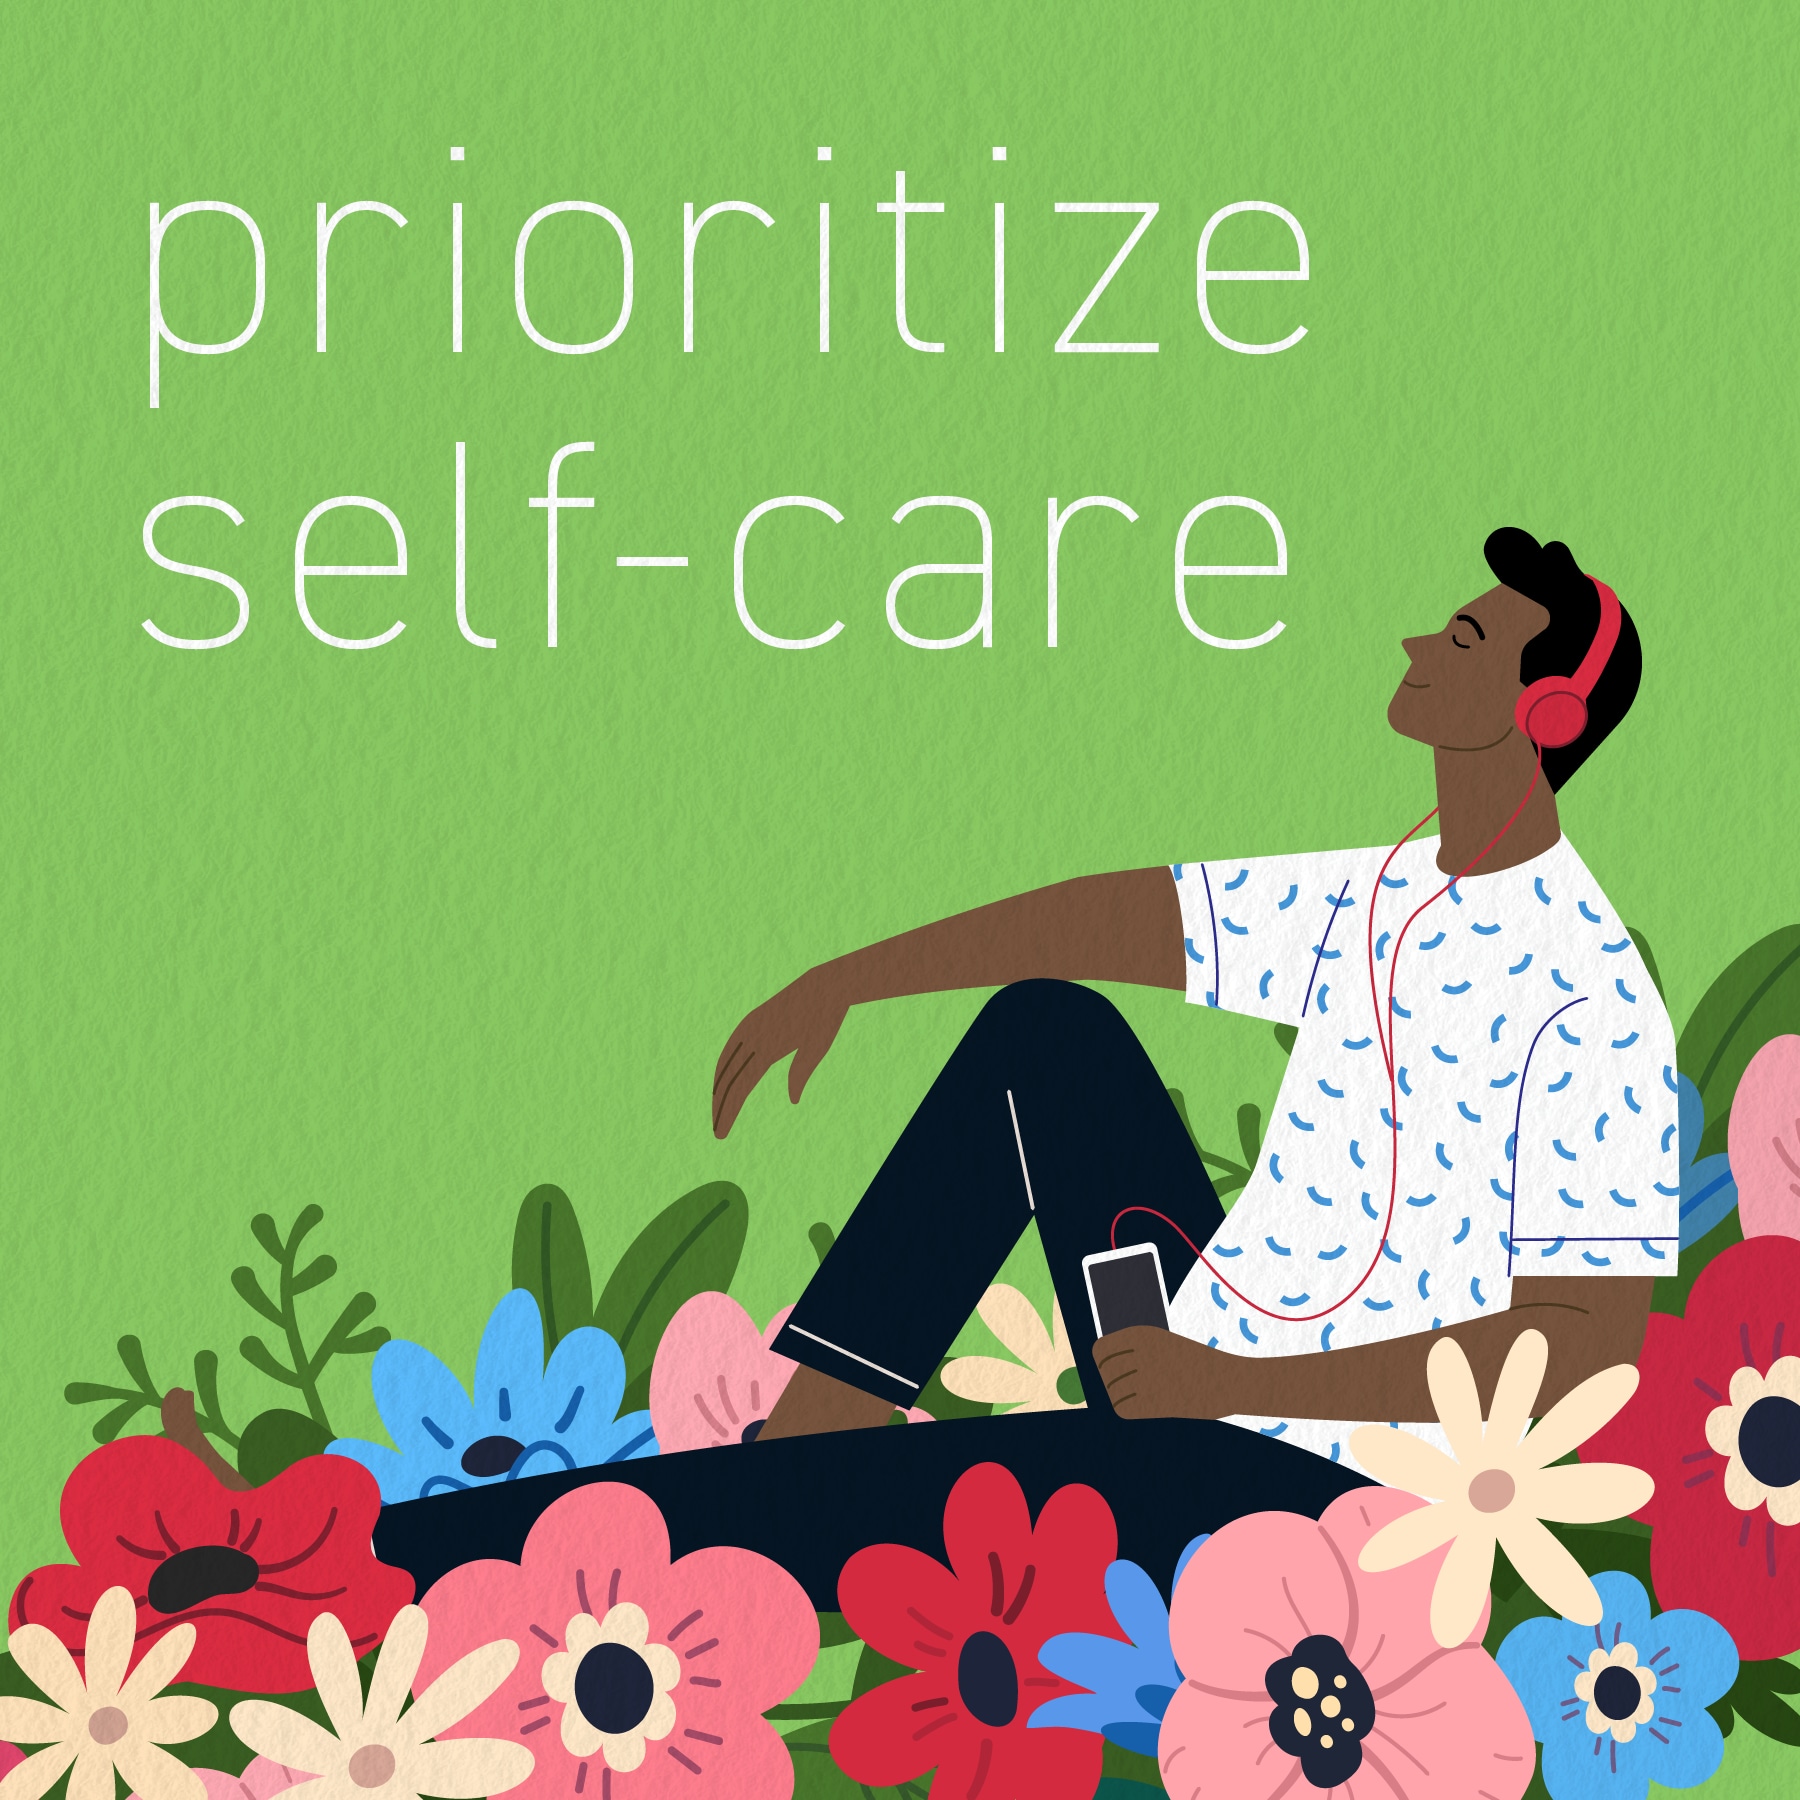 Animation of a man listening to headphones and relaxing in a flower field. Text: prioritize self-care